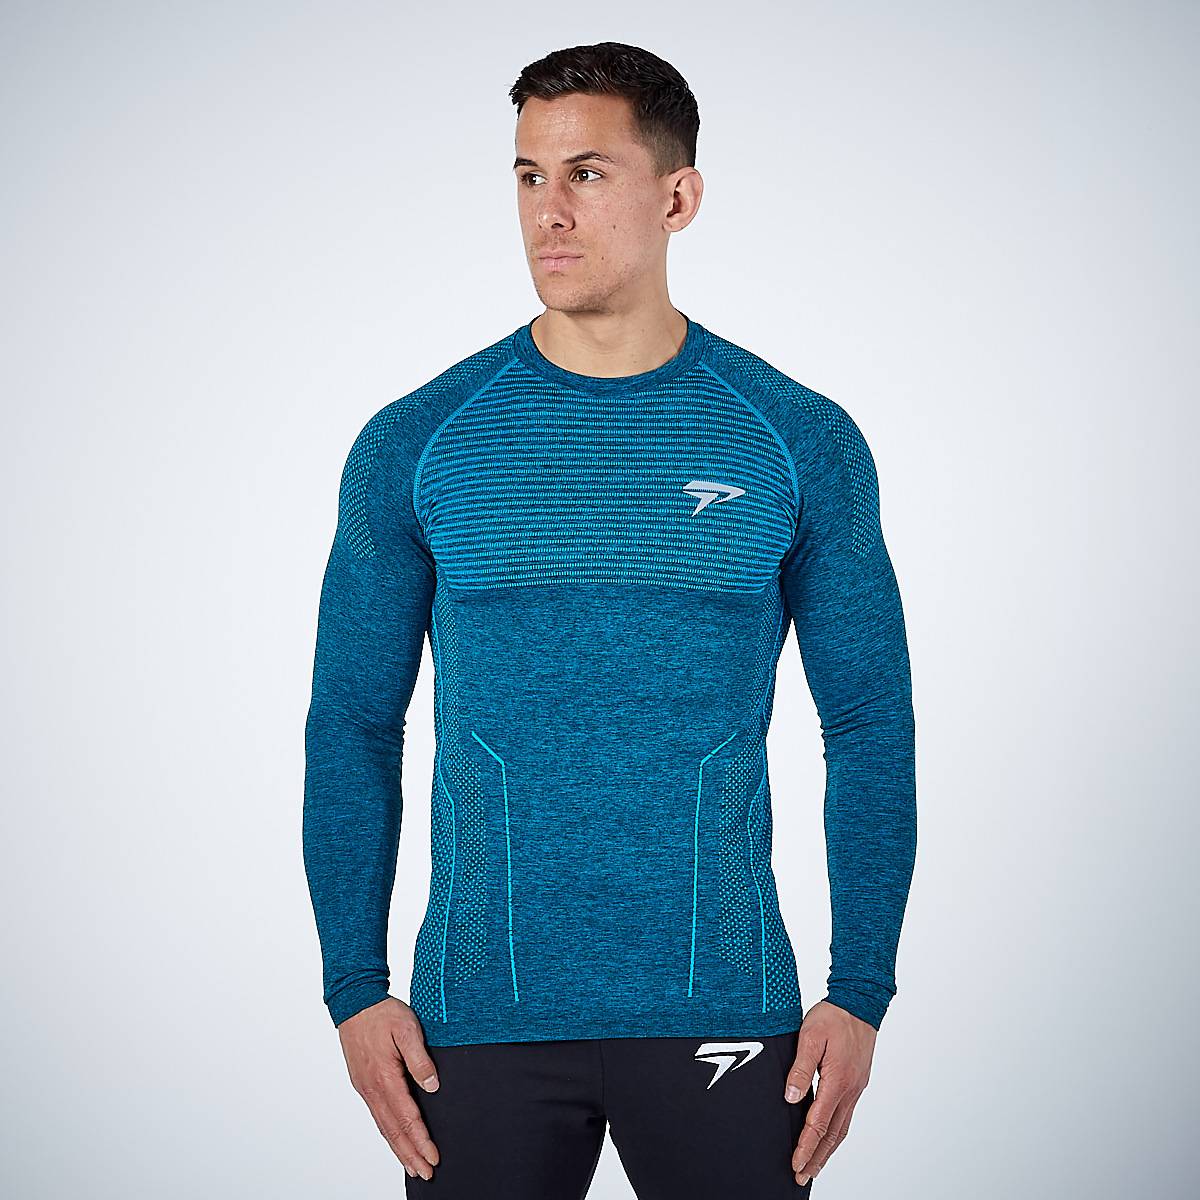 CX1 Men Long Sleeves Quick Dry Sports Shirts Gym Wear Polyester Fitness Tops Full Sleeve T-Shirt for Men